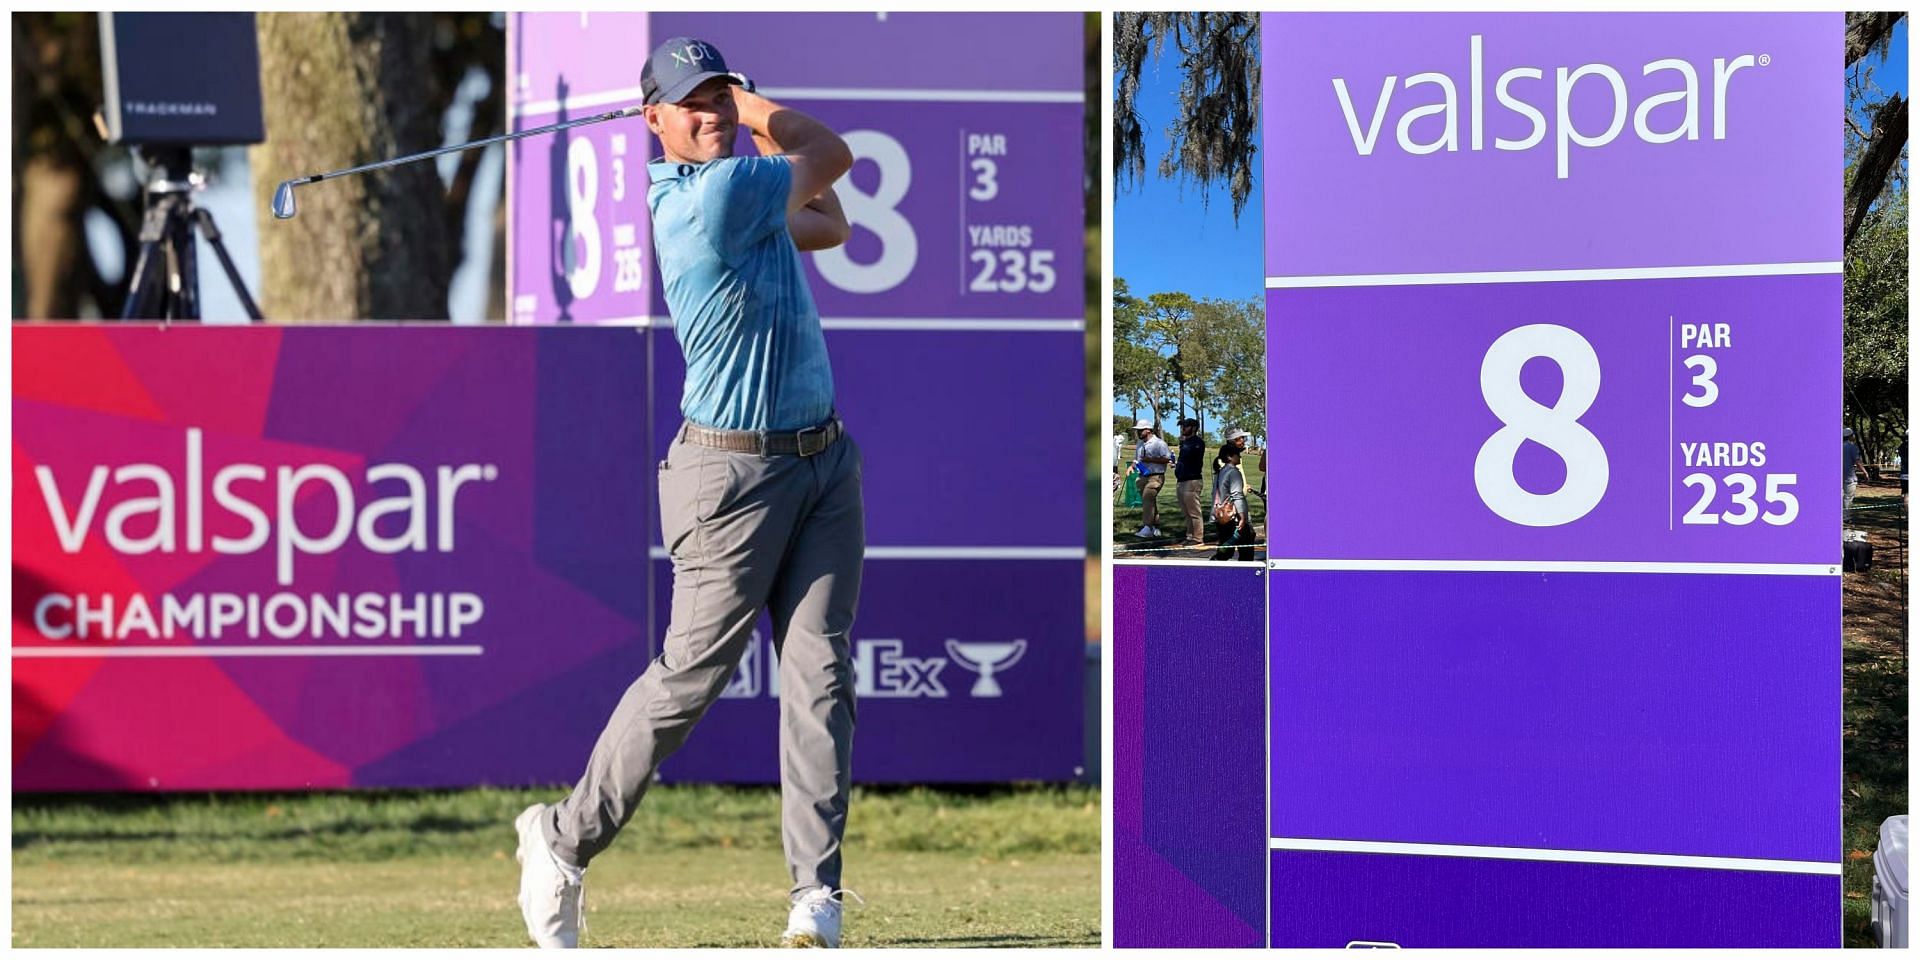 Hole 8 of Valspar is one of the shortest hole on Tour with distance of just 235 yards